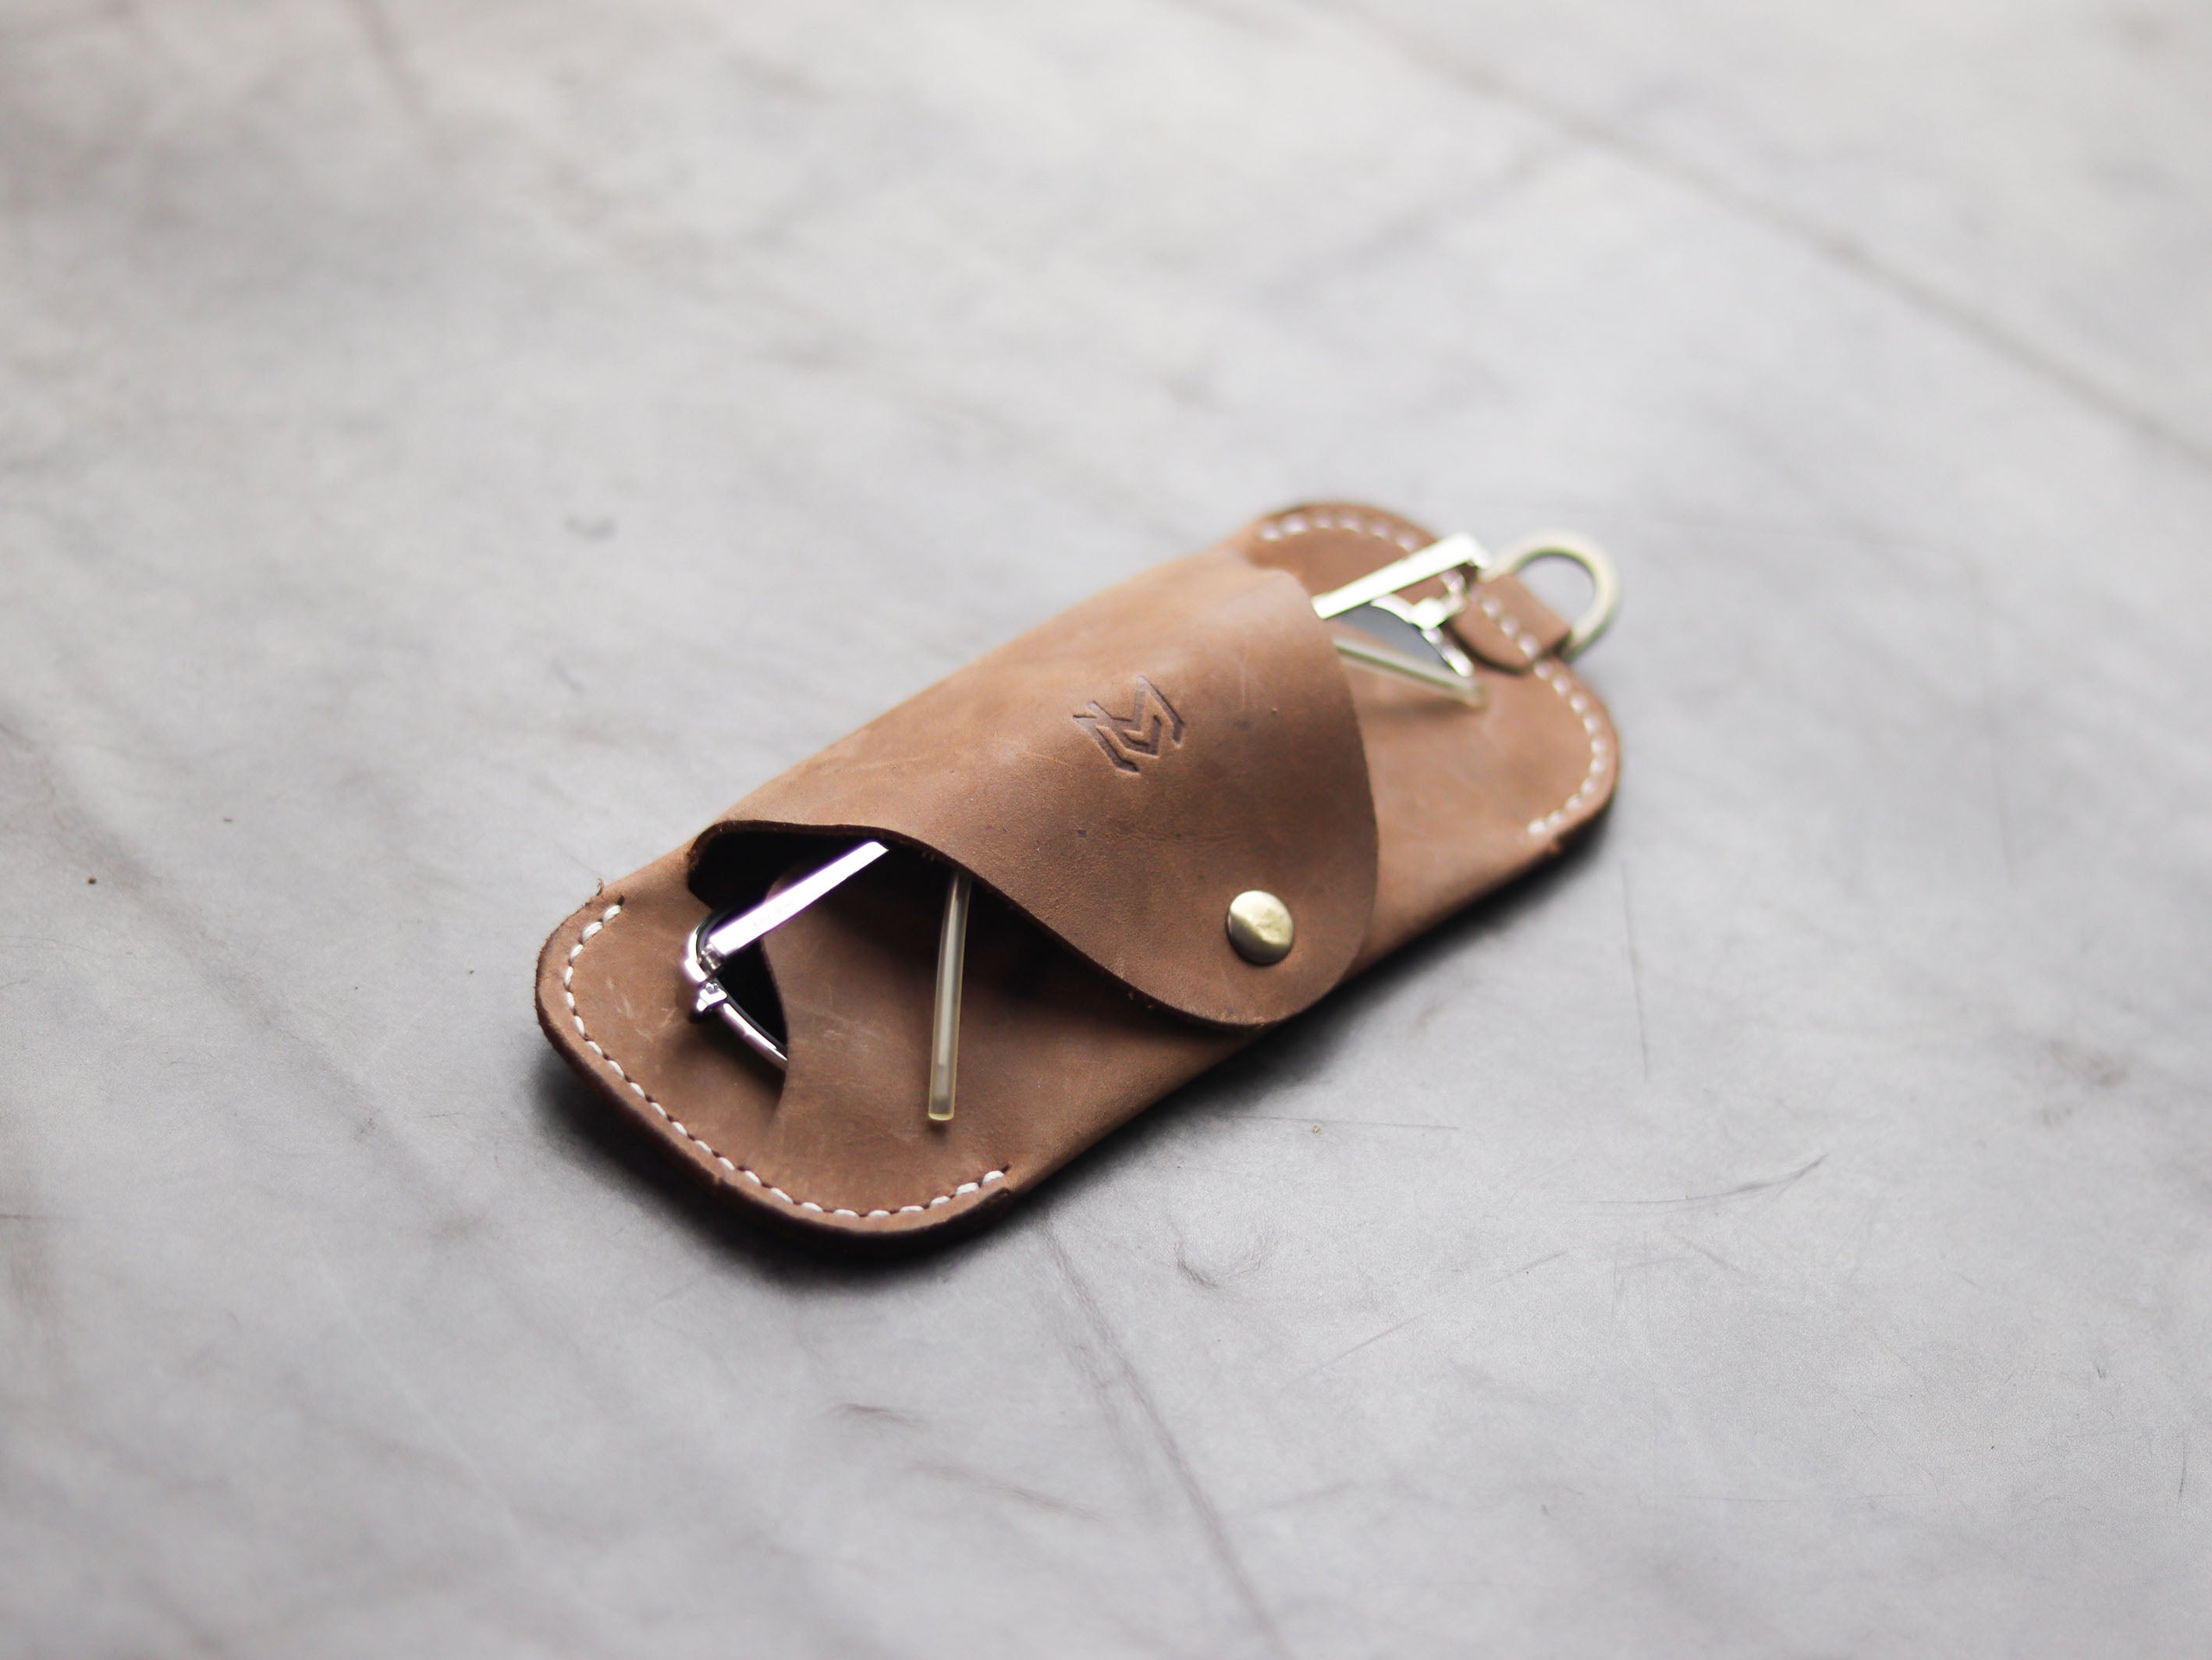 SG-2 SUNGLASSES CASE - RUSTY BROWN LEATHER